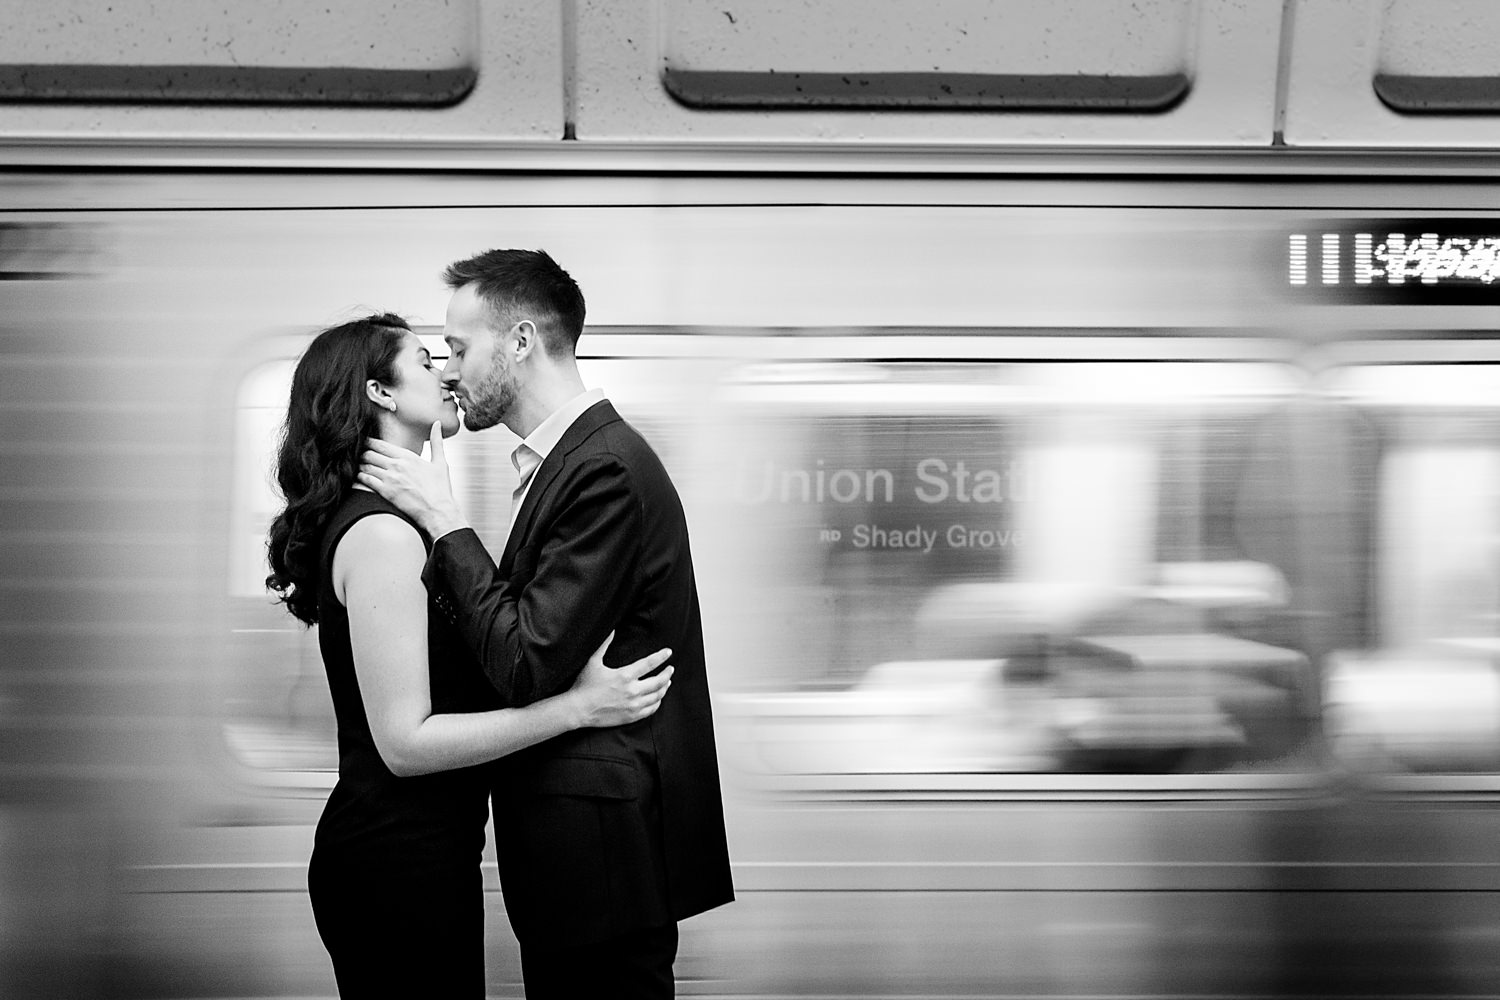 This photo was taken at the Union Station Metro Platform in Washington DC, the train is buzzing by in a blur of movement but you can still see the Union Station sign peeking through the blurred window of the moving metro car, the photo is in black and white, the gal is Indian, they are kissing in front of the train as it comes in, Procopio Photography, best top Washington DC photographer, best top Maryland photographer, best top Virginia photographer, best top DMV photographer, best top wedding photographer, best top commercial photographer, best top portrait photographer, best top boudoir photographer, modern fine art portraits, dramatic, unique, different, bold, editorial, photojournalism, award winning photographer, published photographer, memorable images, be different, stand out, engagement photography